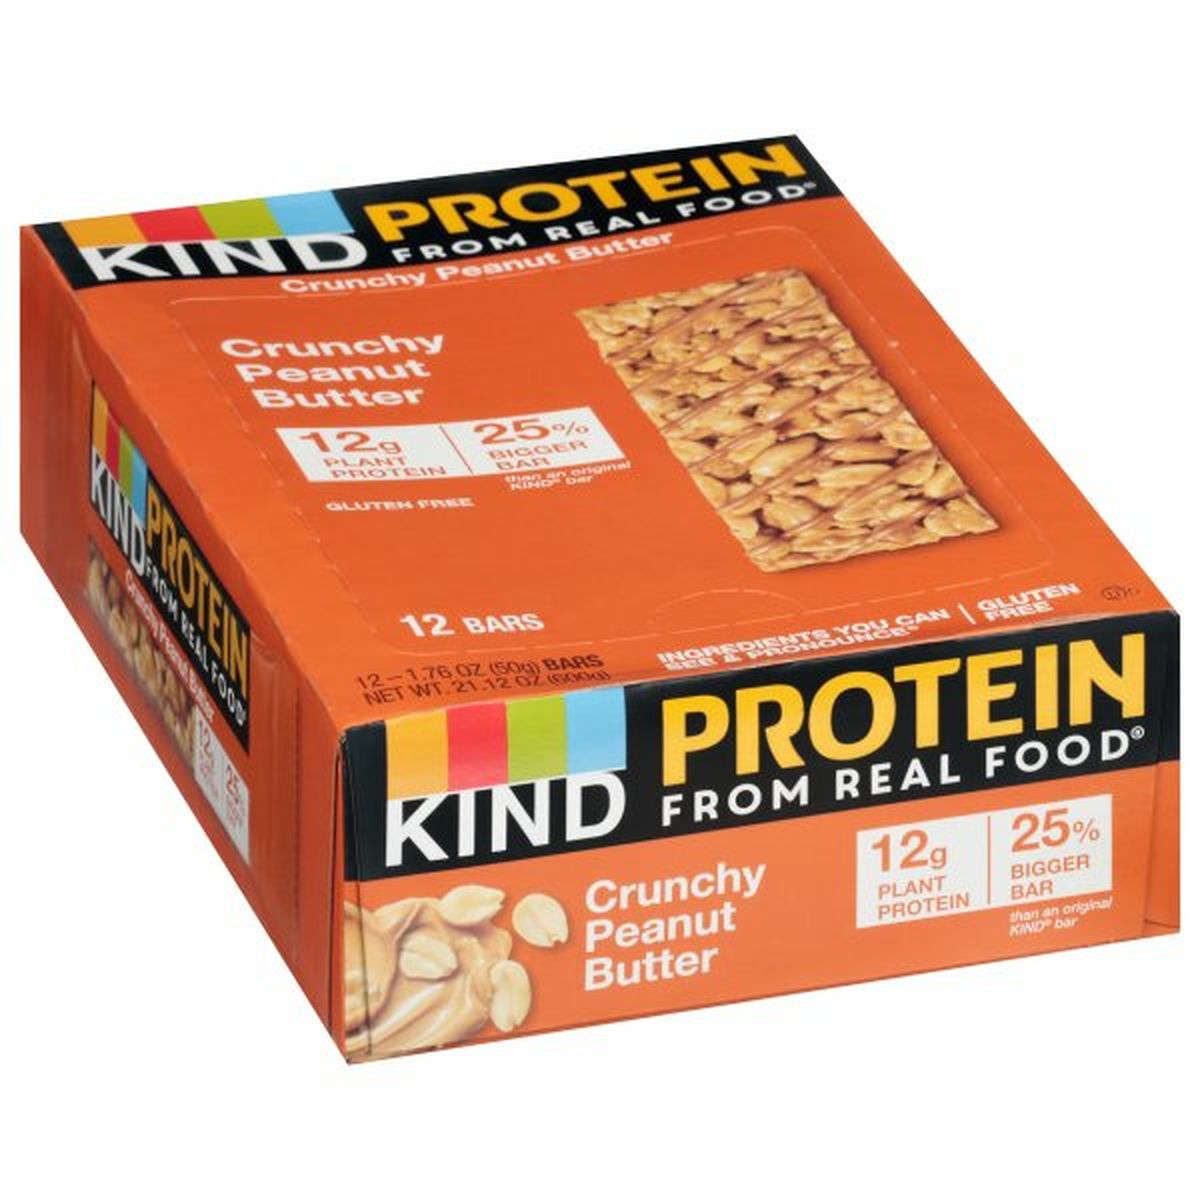 Calories in KIND Protein Bars, Crunchy Peanut Butter